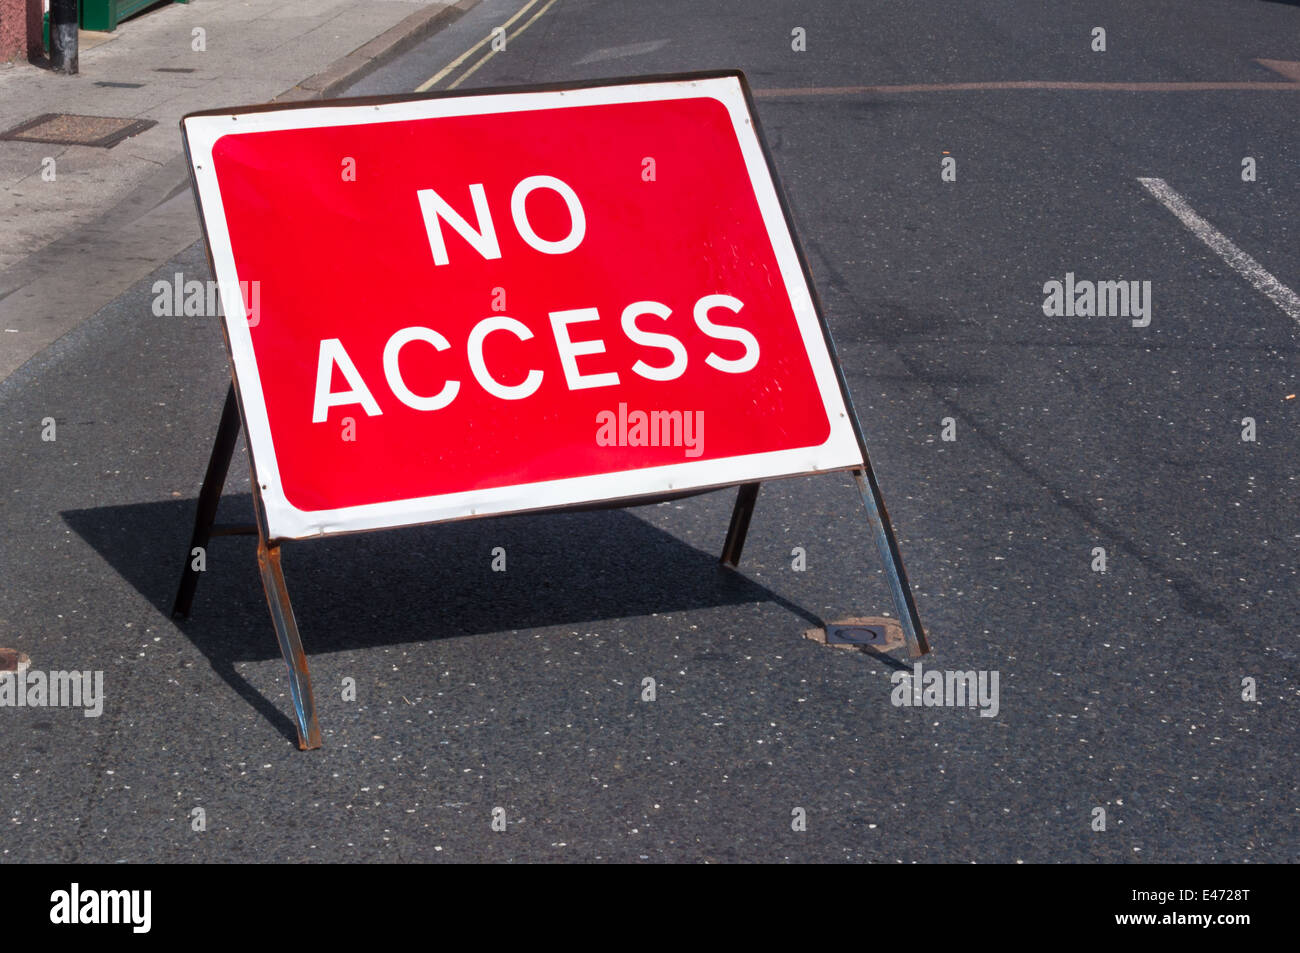 No access road sign for motorists Stock Photo